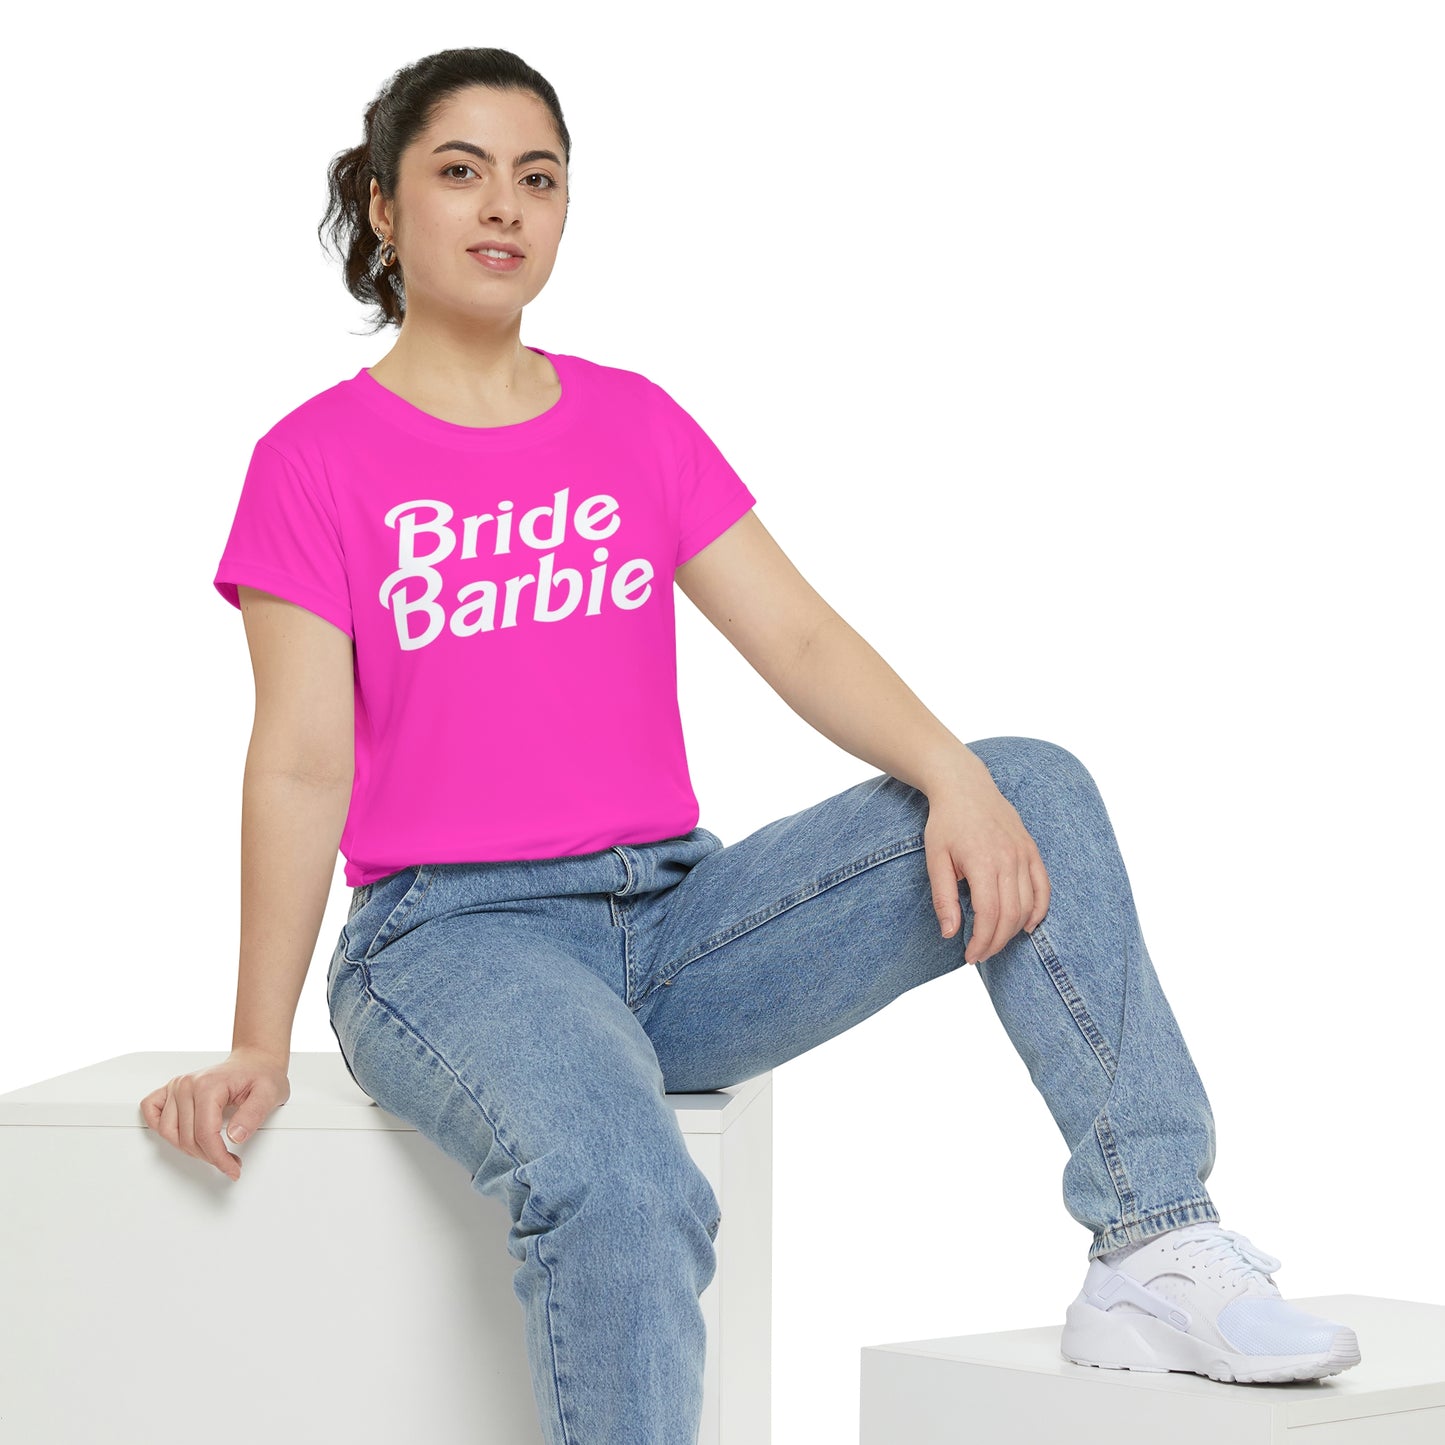 Bride Barbie, Bachelorette Party Shirts, Bridesmaid Gifts, Here comes the Party Tees, Group Party Favor Shirts, Bridal Party Shirt for women